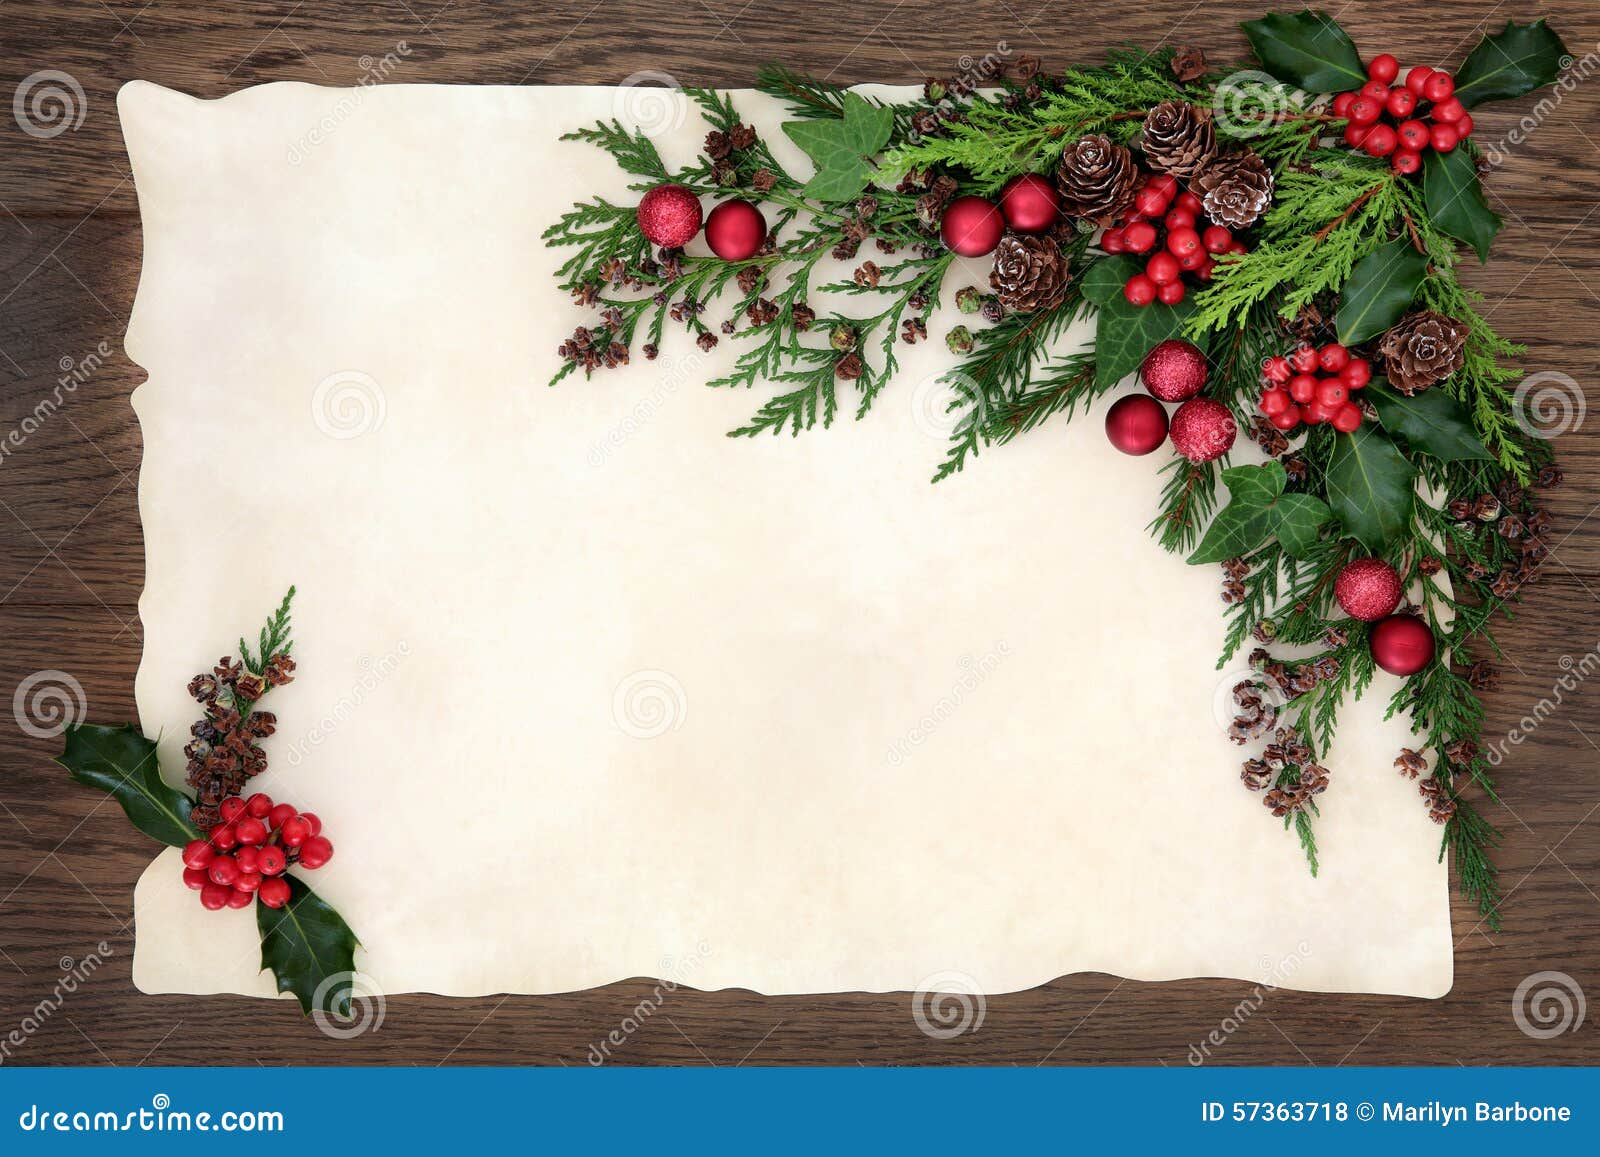 Old fashioned christmas background border with holly, mistletoe, ivy,  juniper fir and pine cones on parchment paper over old oak wood. Stock  Photo